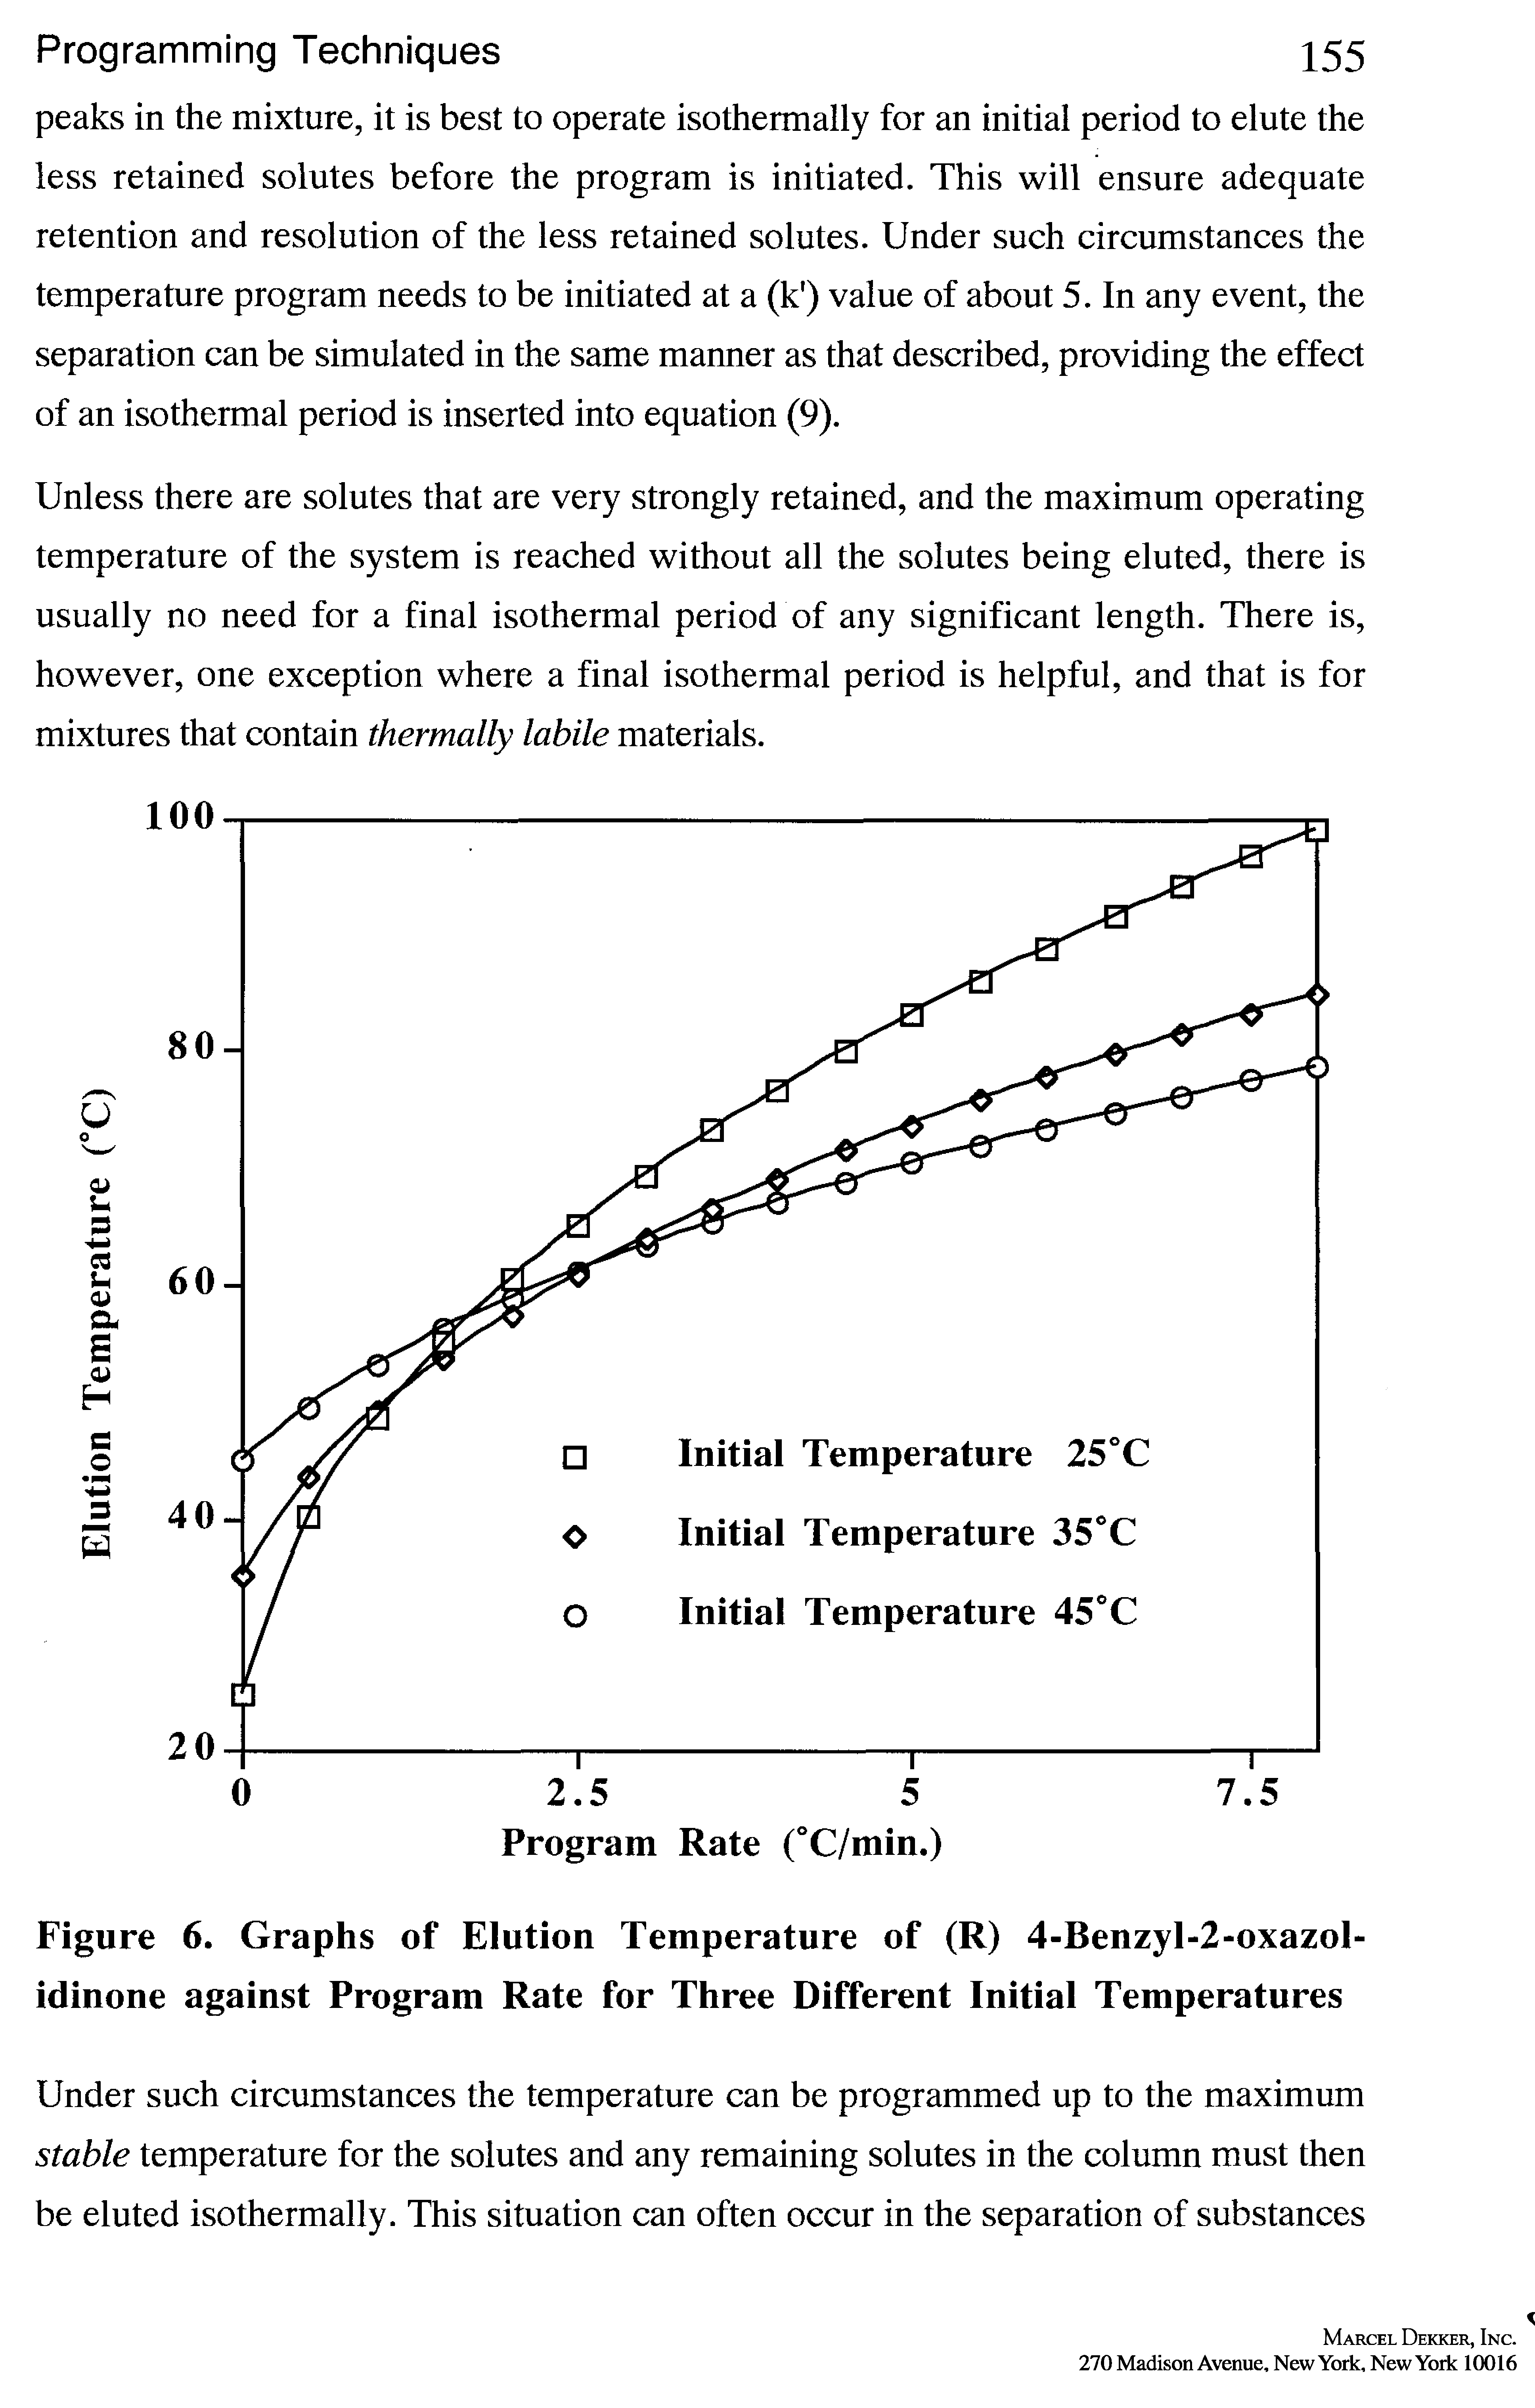 Figure 6. Graphs of Elution Temperature of (R) 4-Benzyl-2-oxazol-idinone against Program Rate for Three Different Initial Temperatures...